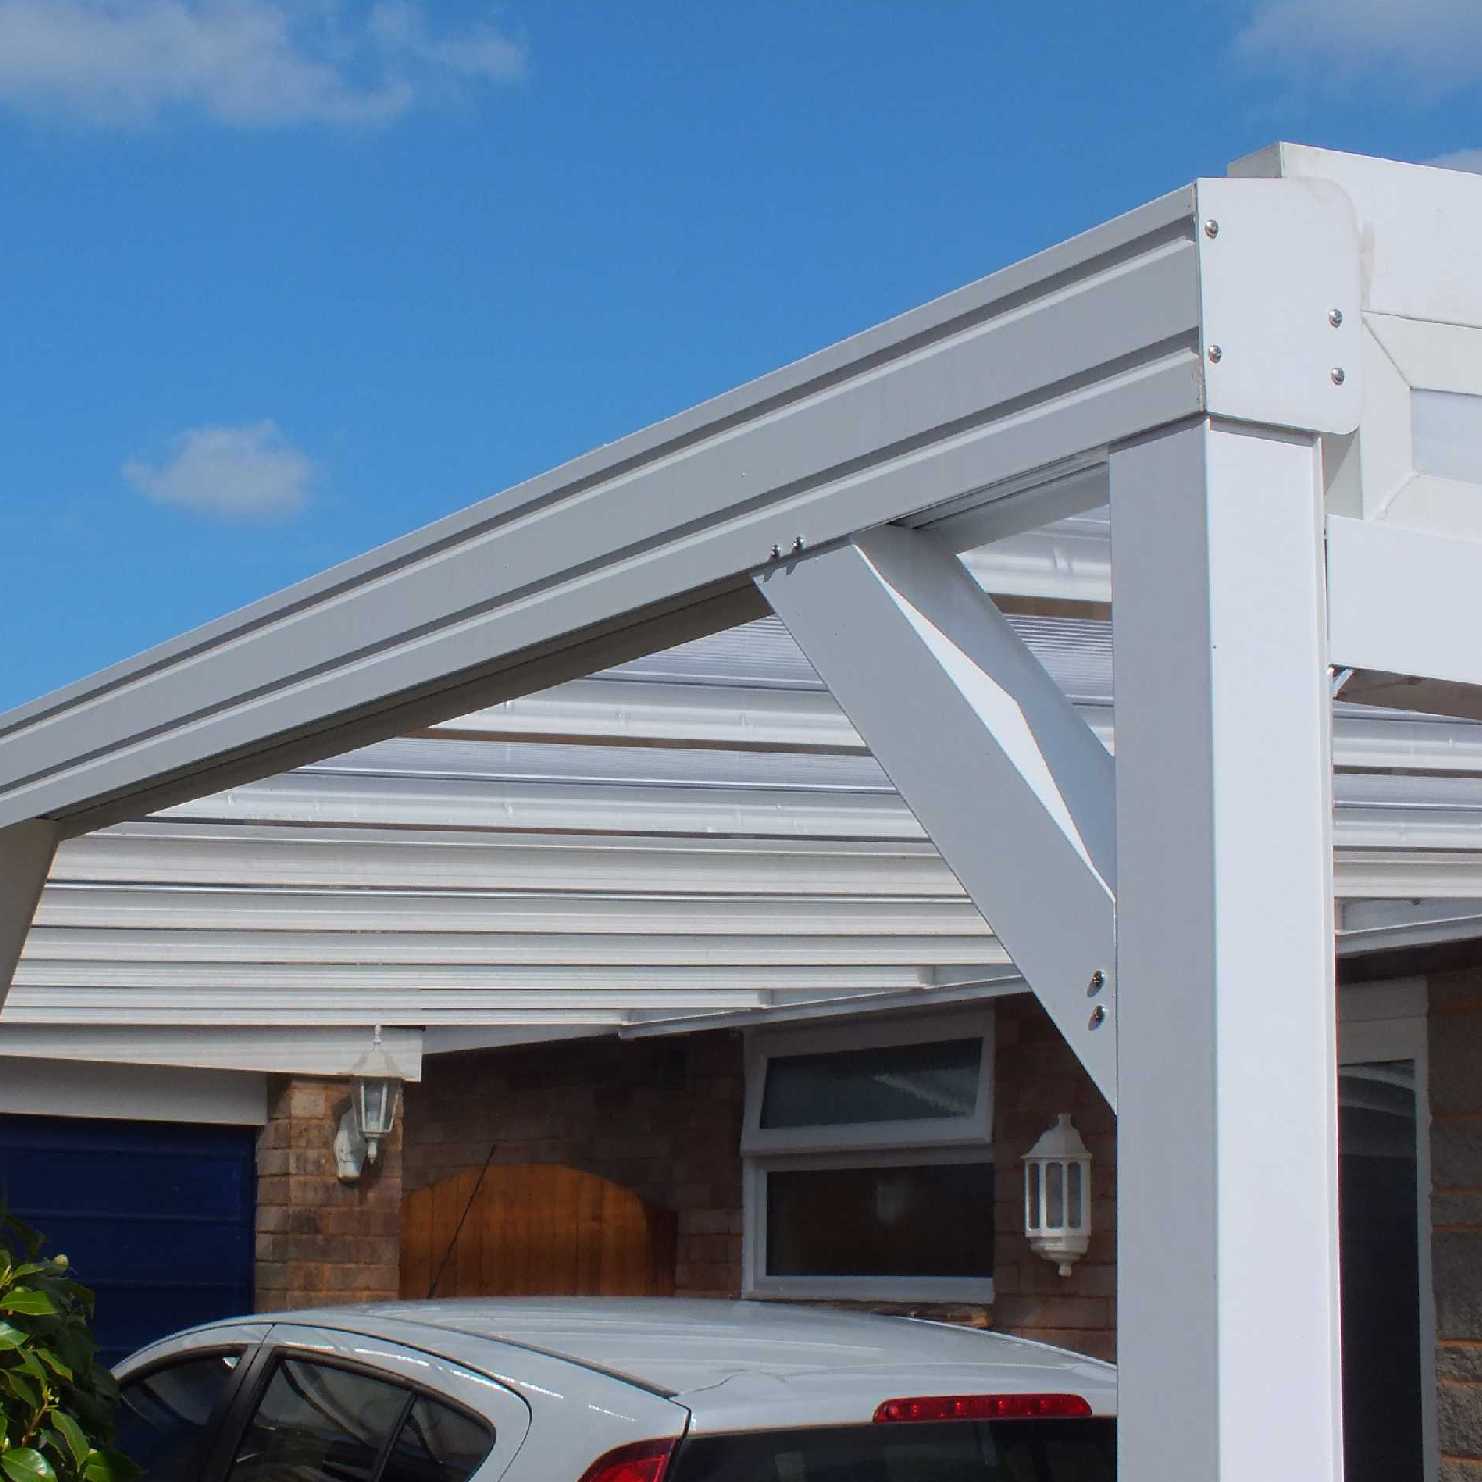 Great deals on Omega Smart Lean-To Canopy, White with 16mm Polycarbonate Glazing - 9.9m (W) x 4.0m (P), (5) Supporting Posts